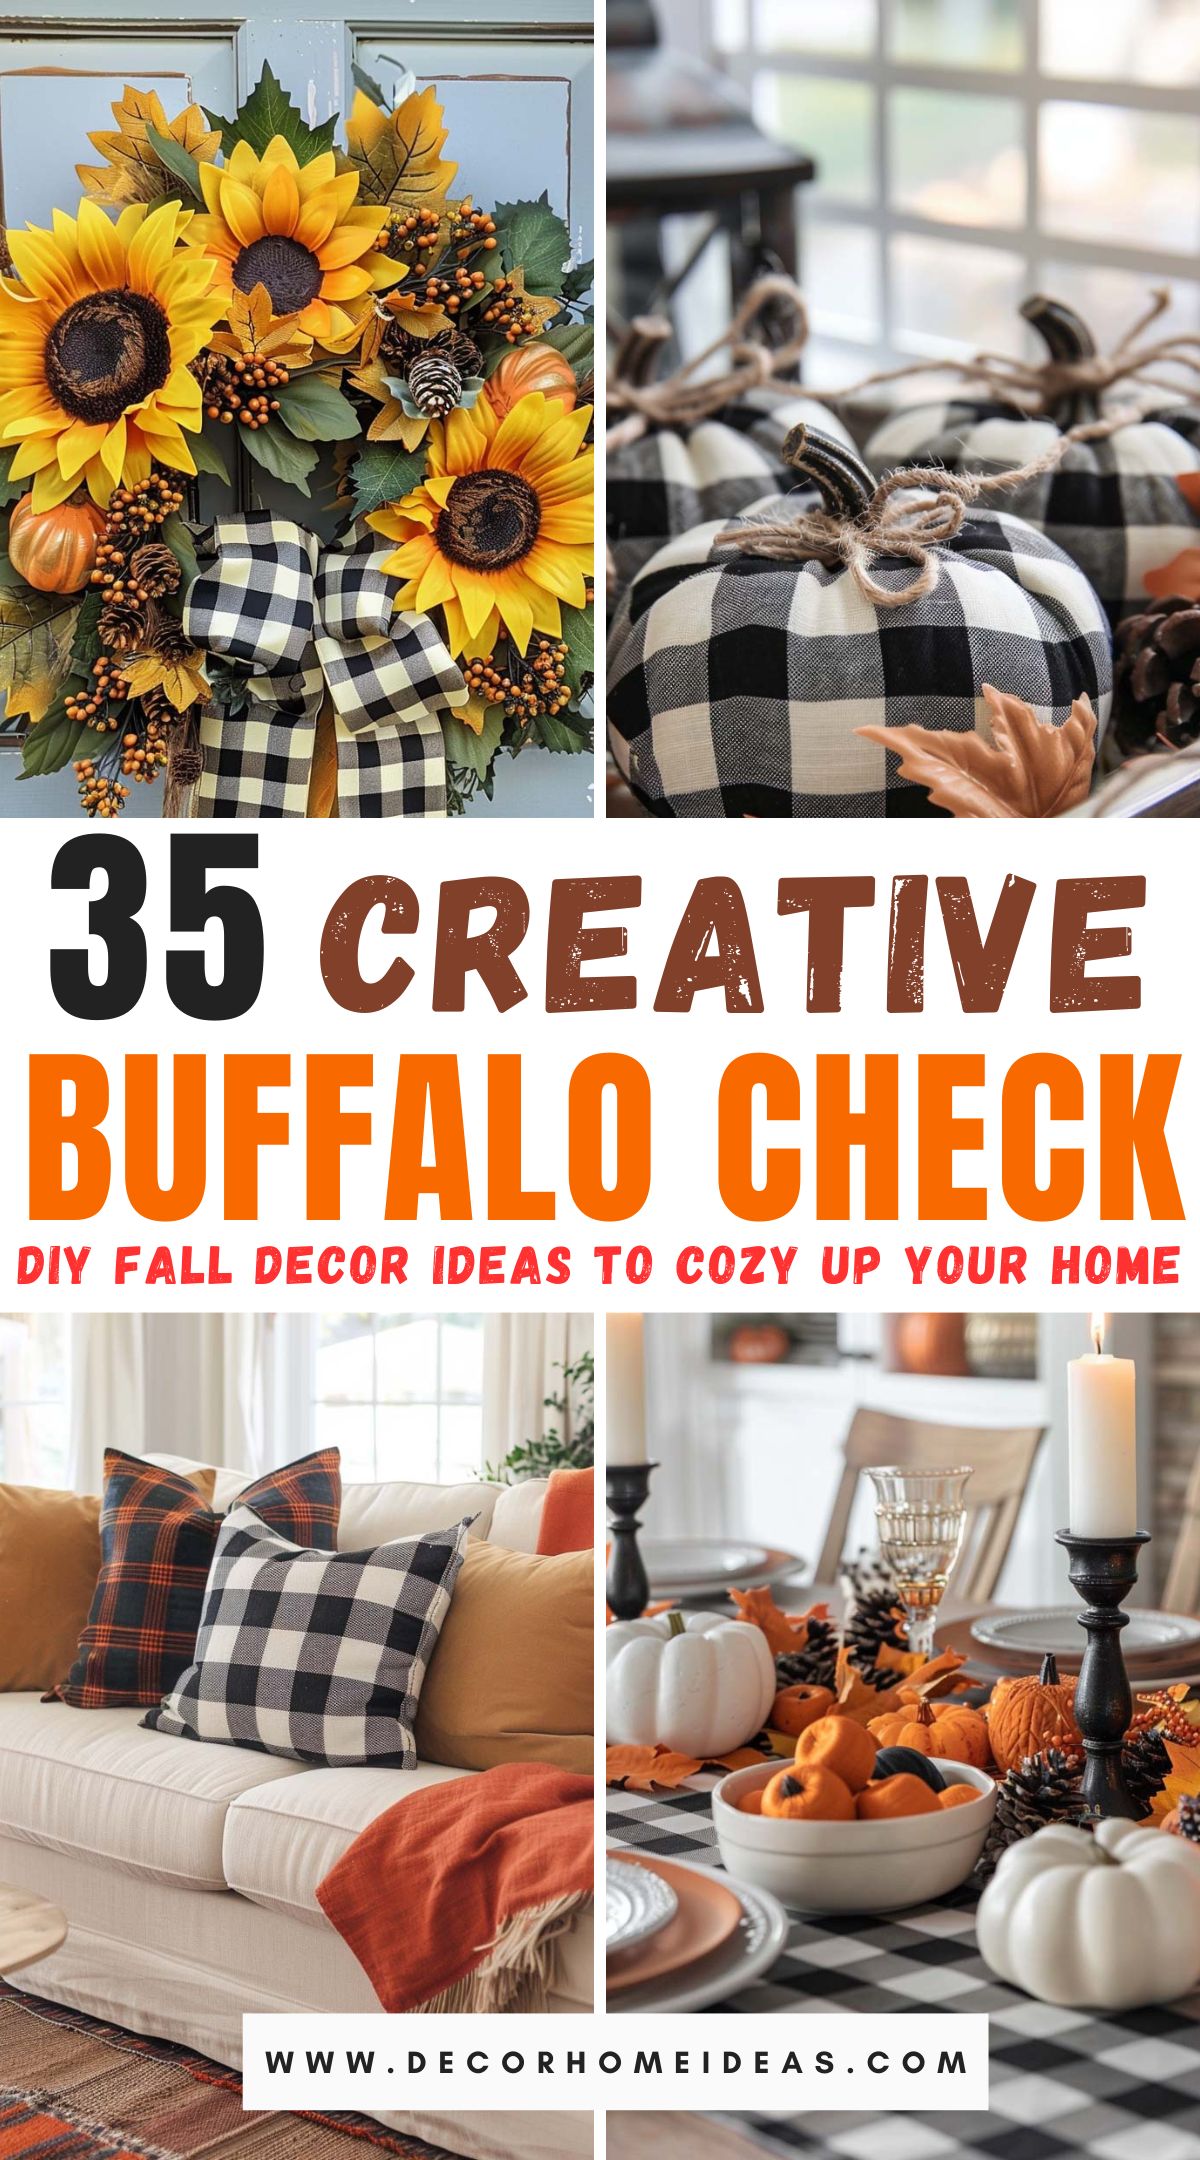 Get cozy this fall with 35 fantastic buffalo check DIY decor ideas. From pillows and throws to wreaths and table settings, discover creative projects that bring warmth and charm to your home. Find inspiration to infuse your space with the timeless appeal of buffalo check patterns.